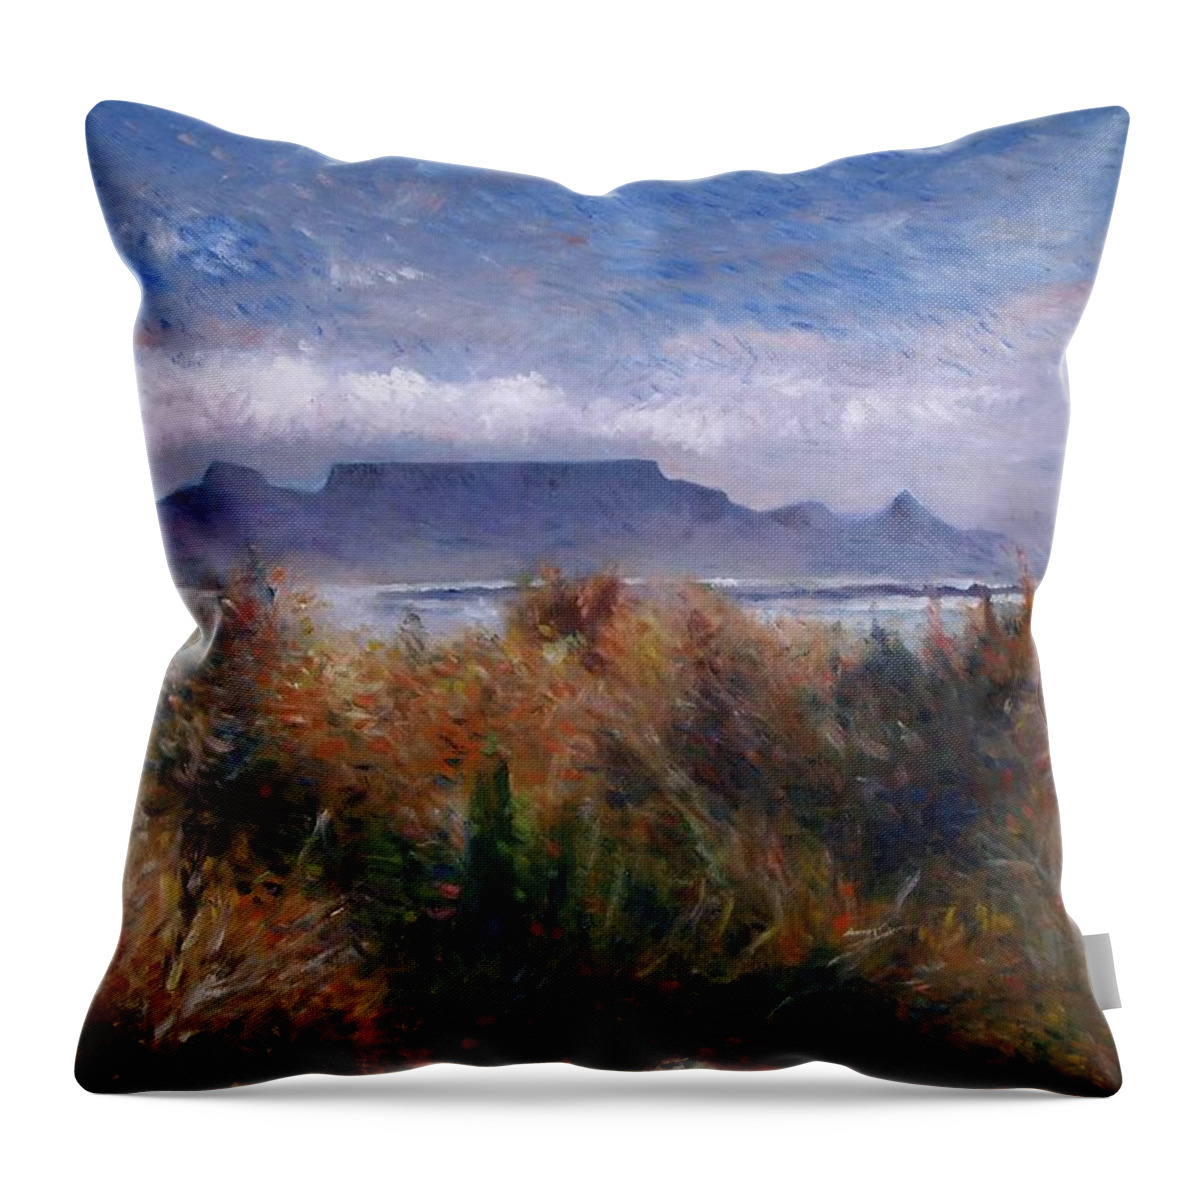 Cape Town South Africa Throw Pillow featuring the painting Table Mountain from Blouwbergstrand Cape Town South Africa 1999 by Enver Larney